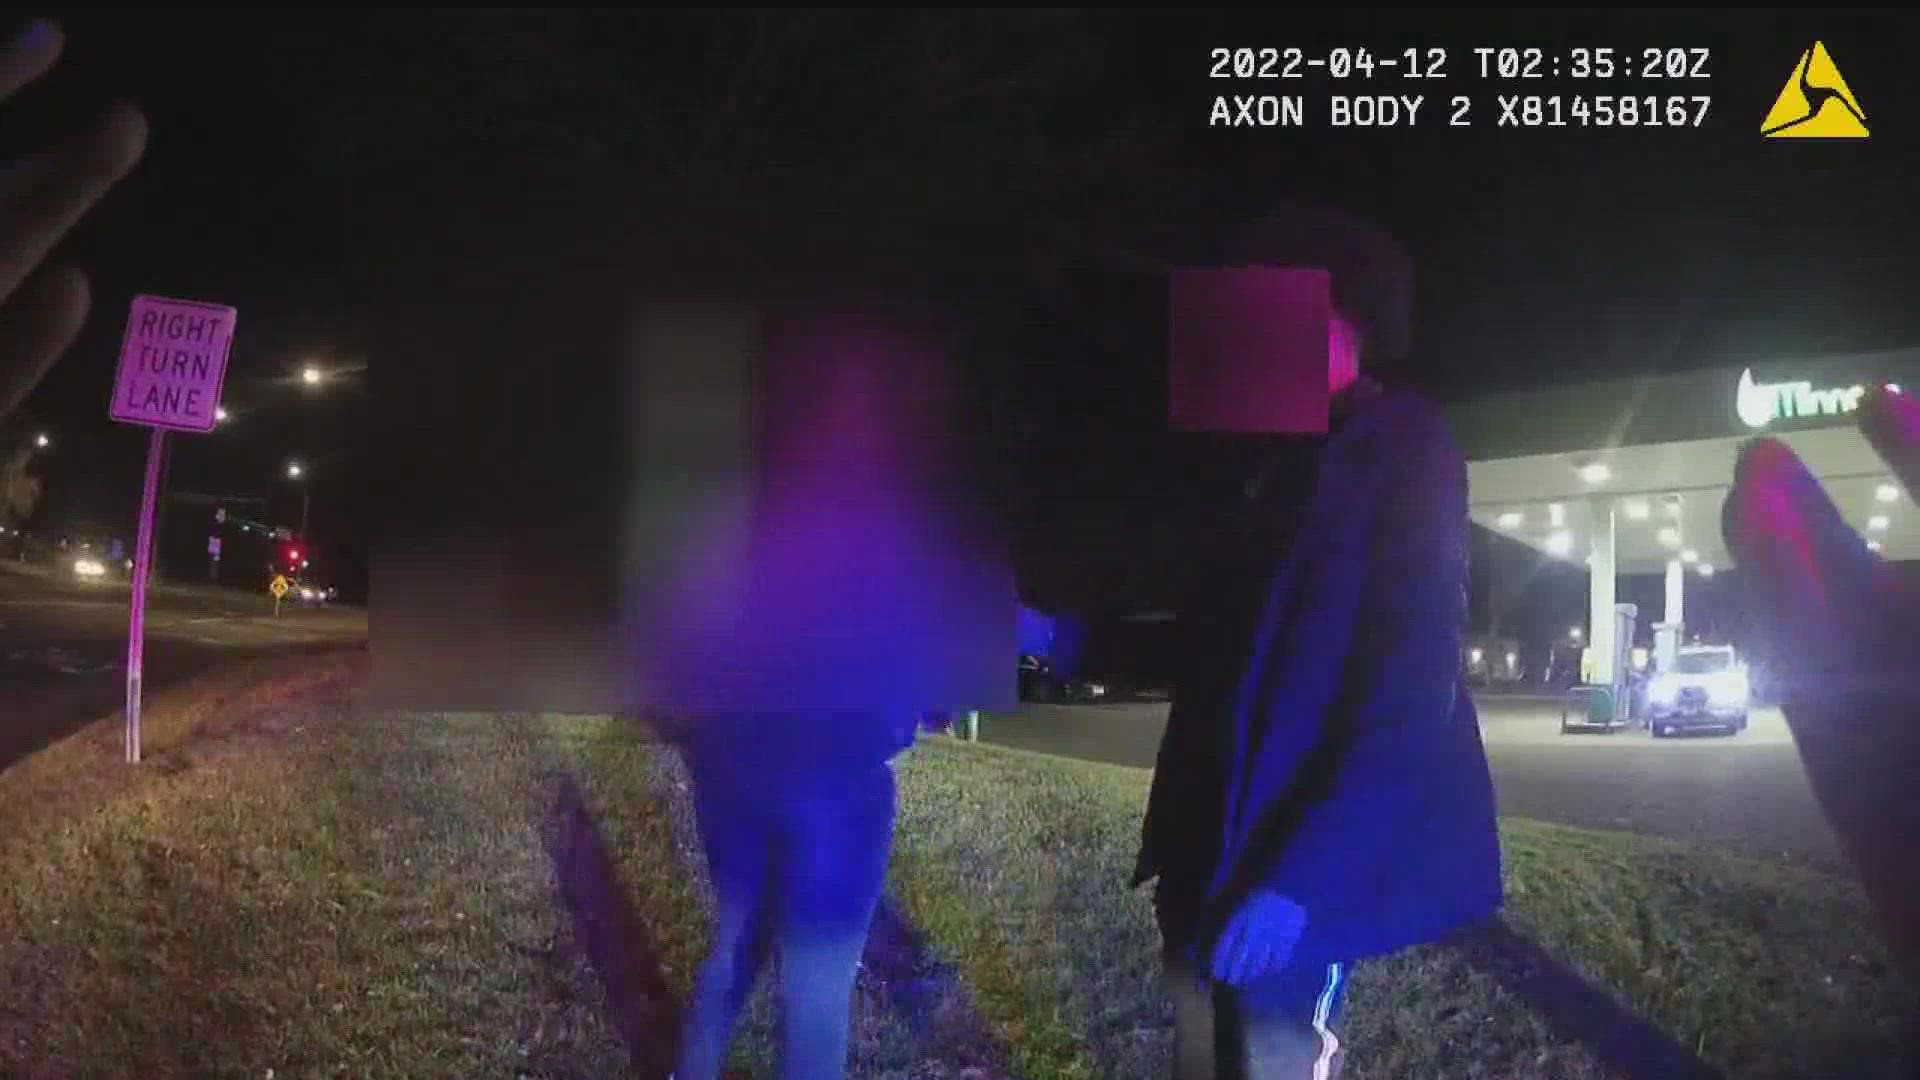 The Maplewood Police Department released 46 minutes of officer body camera footage Wednesday from an incident earlier this week in which four children were detained.